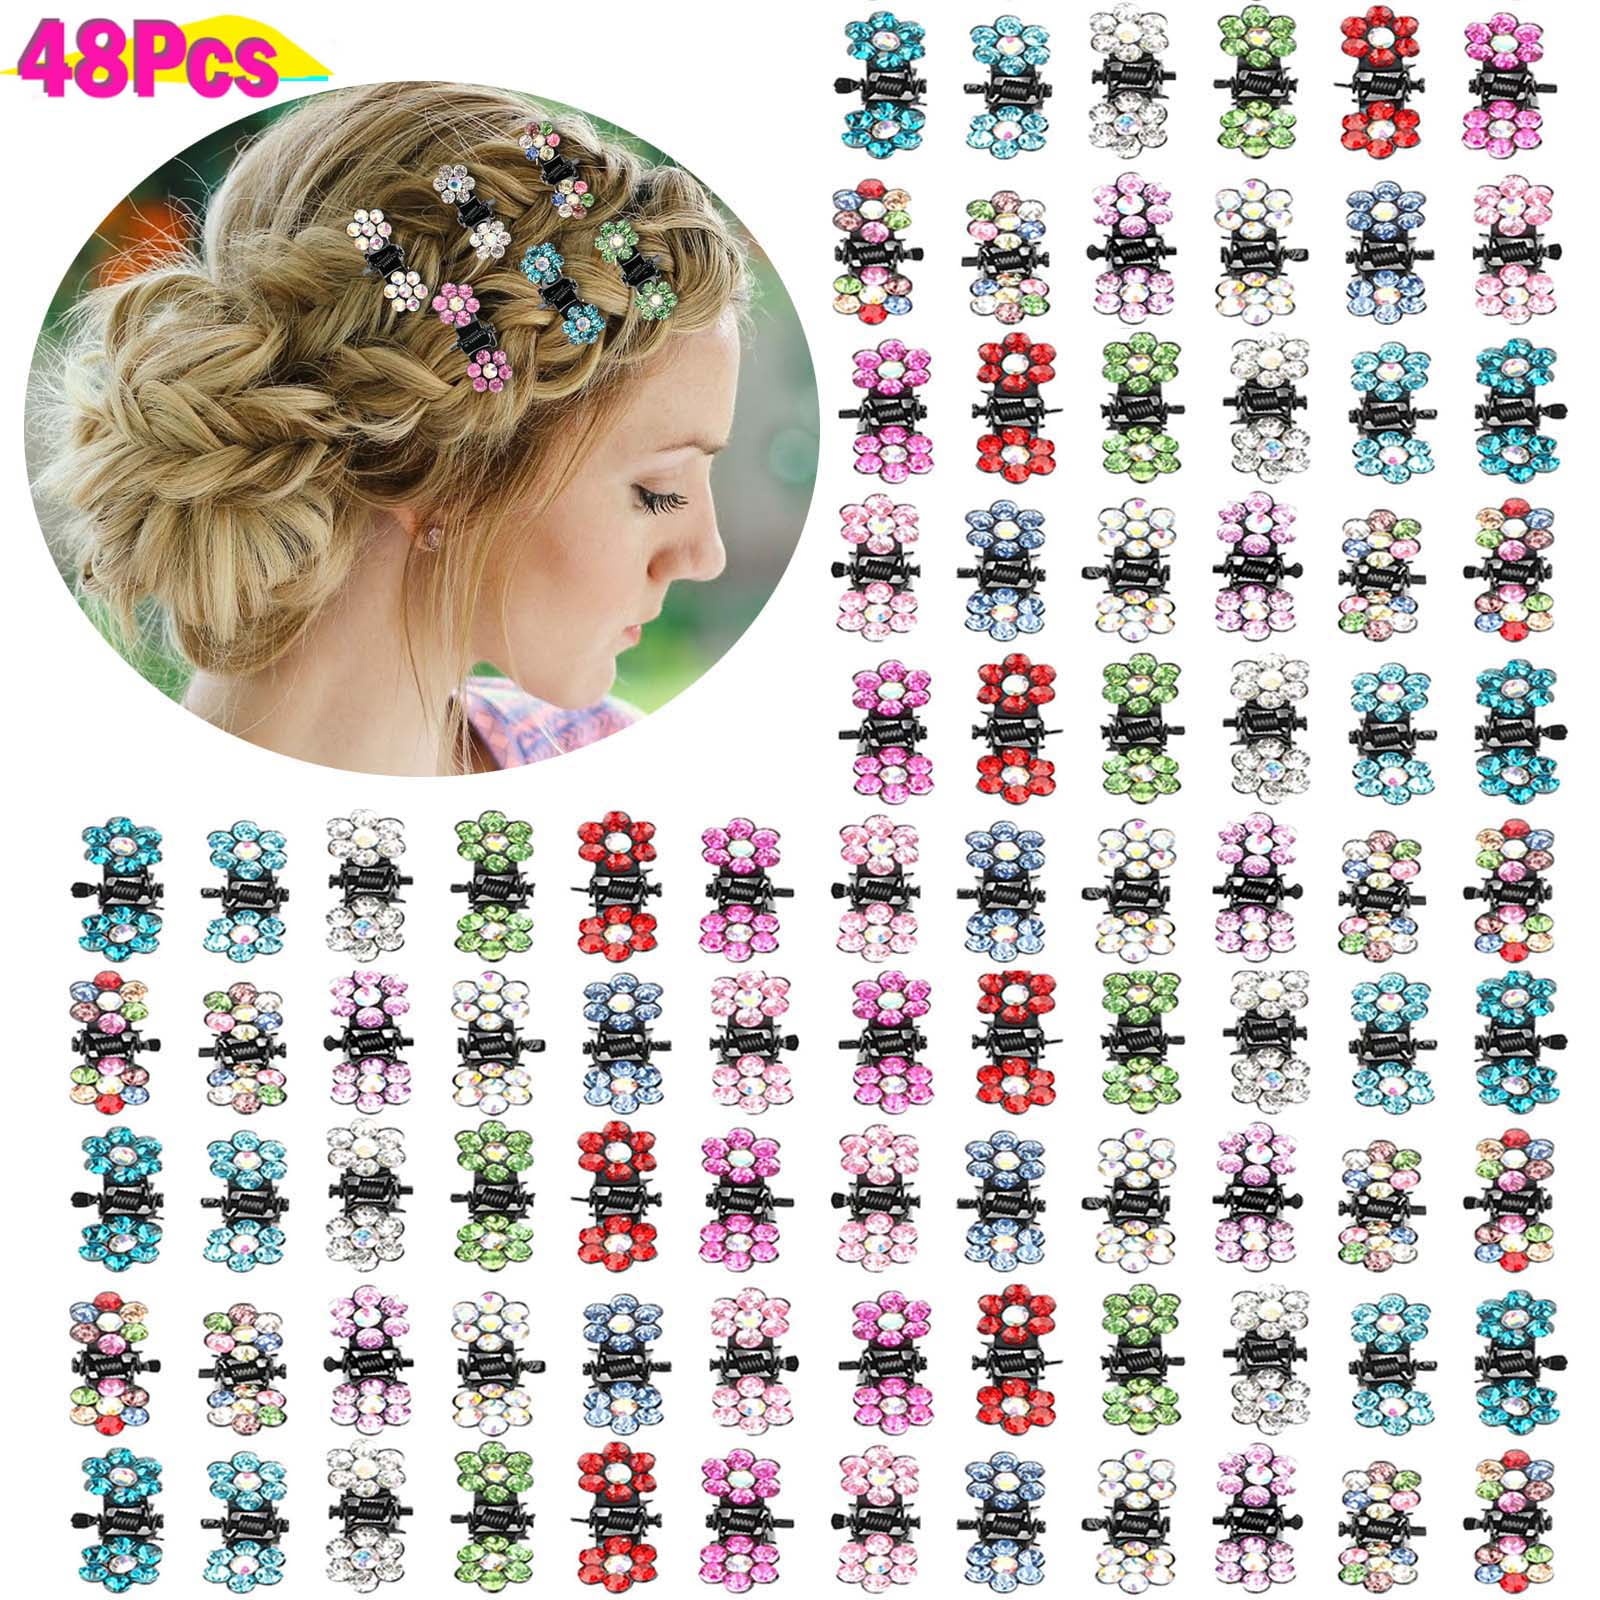 30X Mix Colored Girls Kids Baby Mini Flower Hair Claw Jaw Clips Hair Accessory 